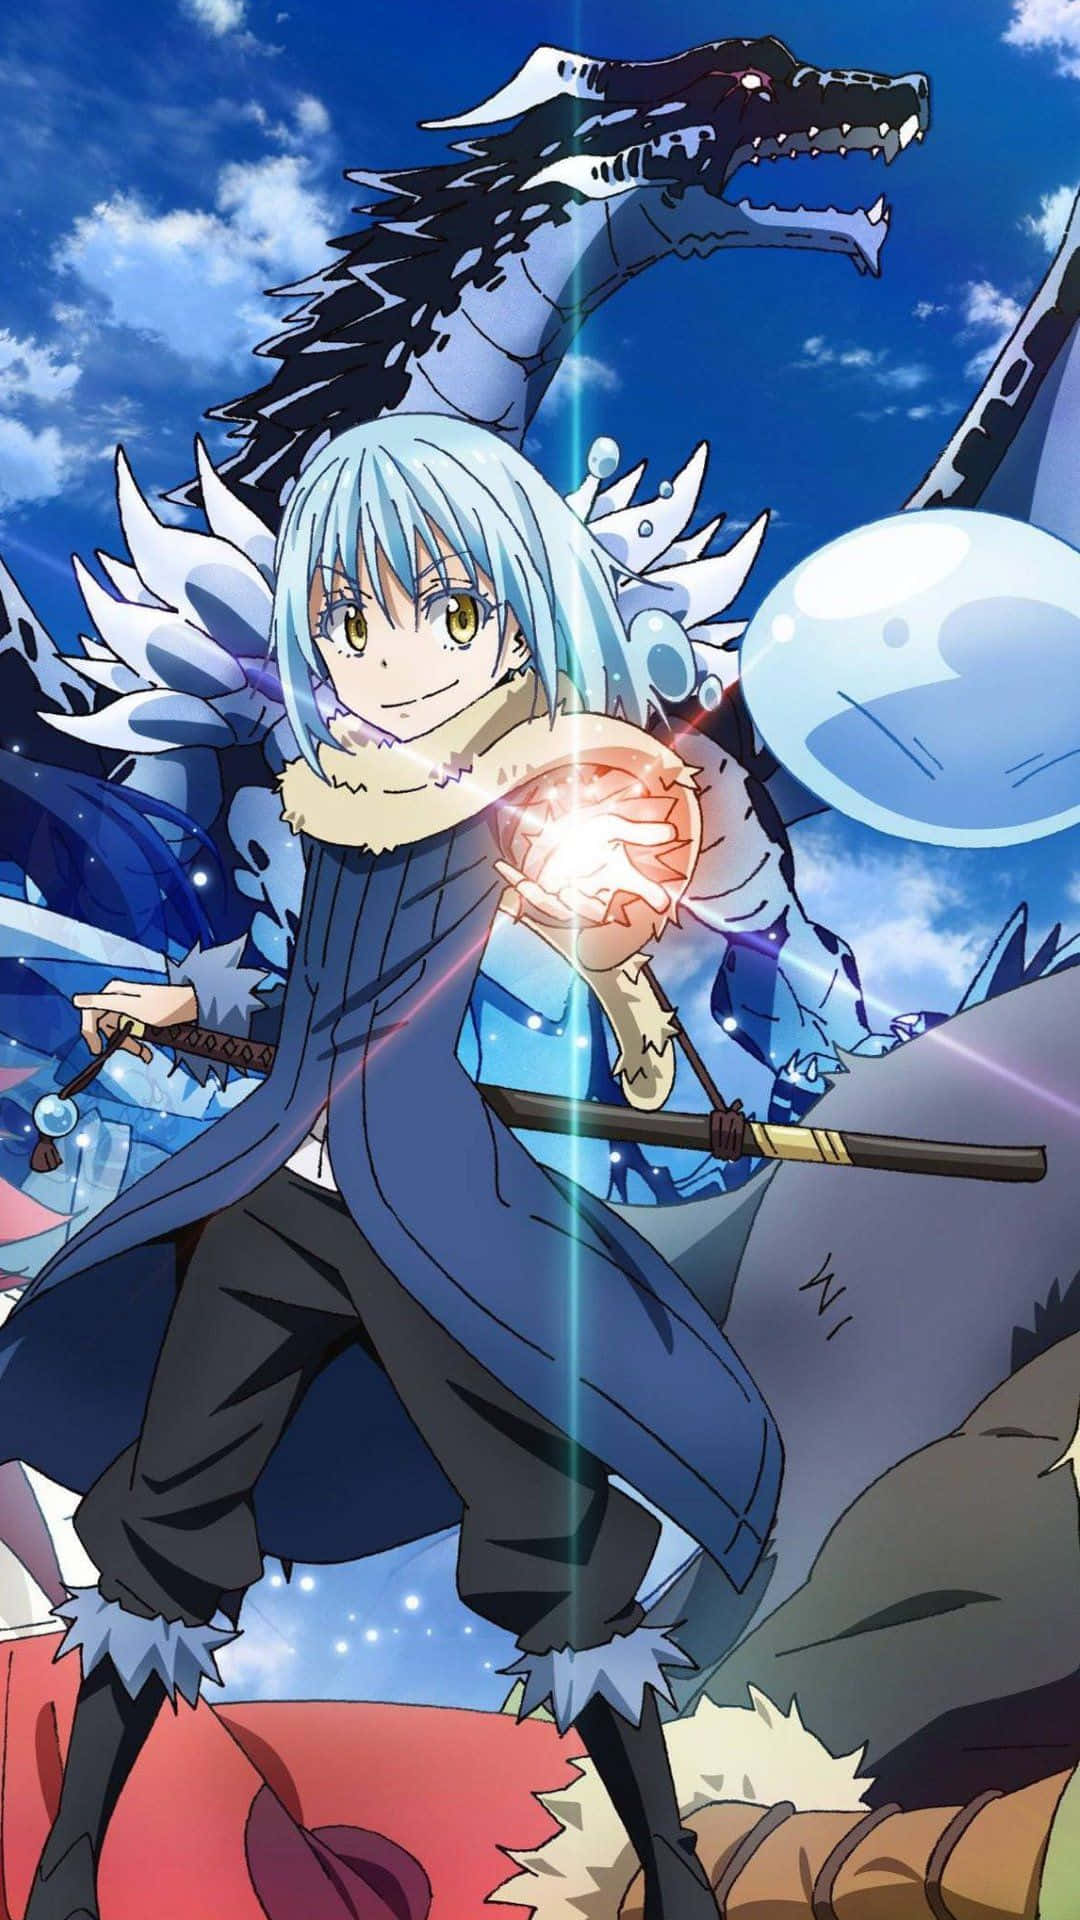 Rimuru, the protagonist of That Time I Got Reincarnated As A Slime